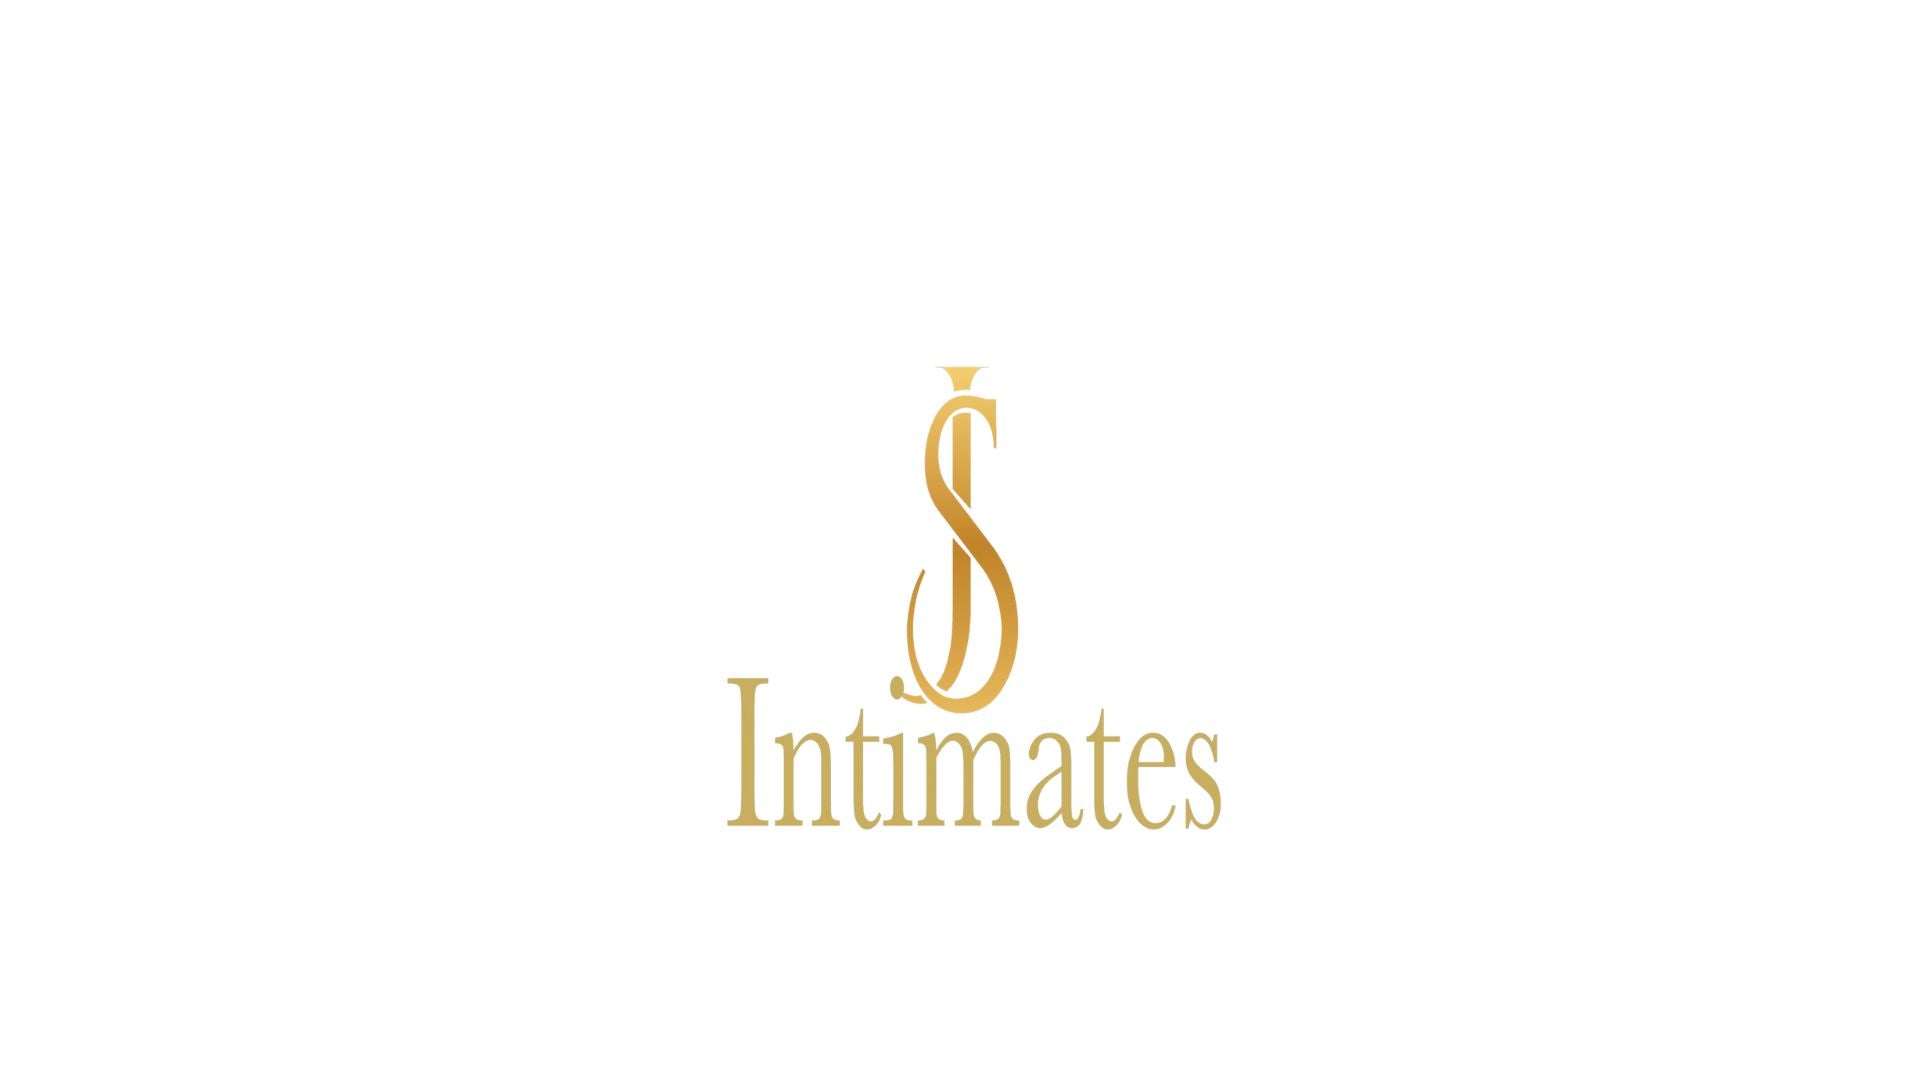 Sandi_J Intimates
<div style="text-align: center;">SJ Intimates has launched, quality luxurious underwear you will want to wear every day.</div>

Le' Diva Boutique Store